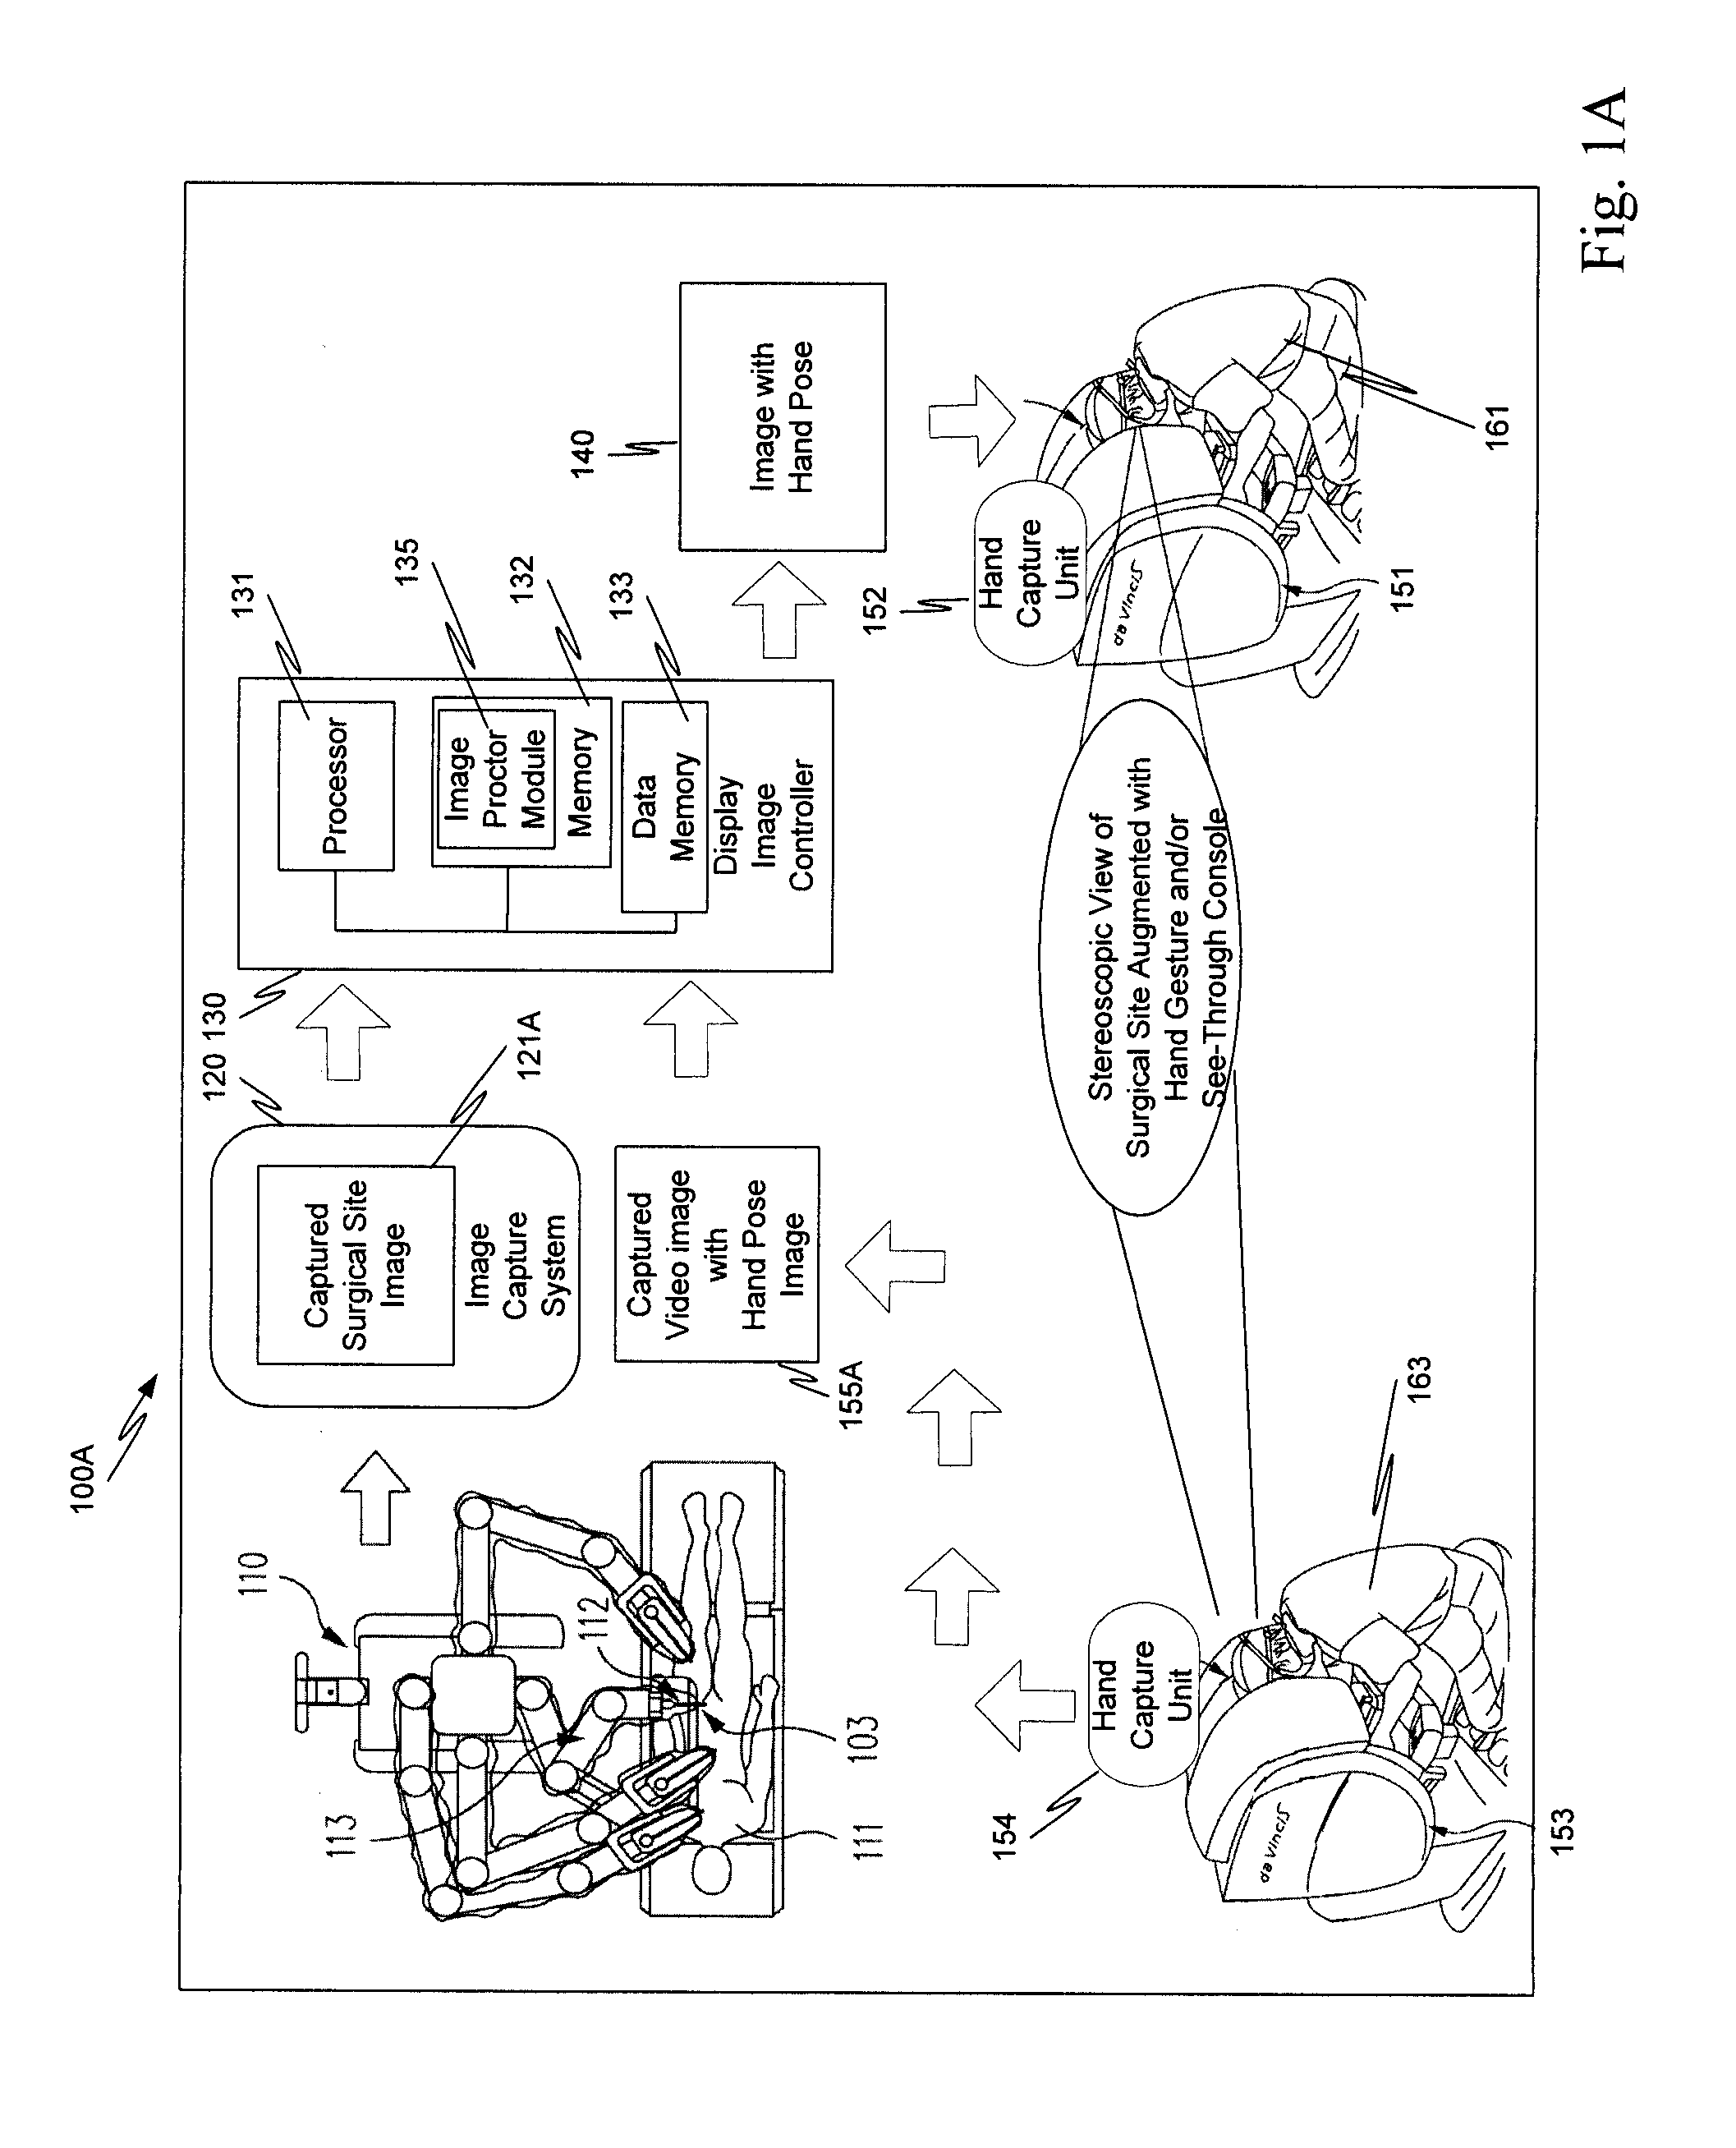 Method and system of see-through console overlay